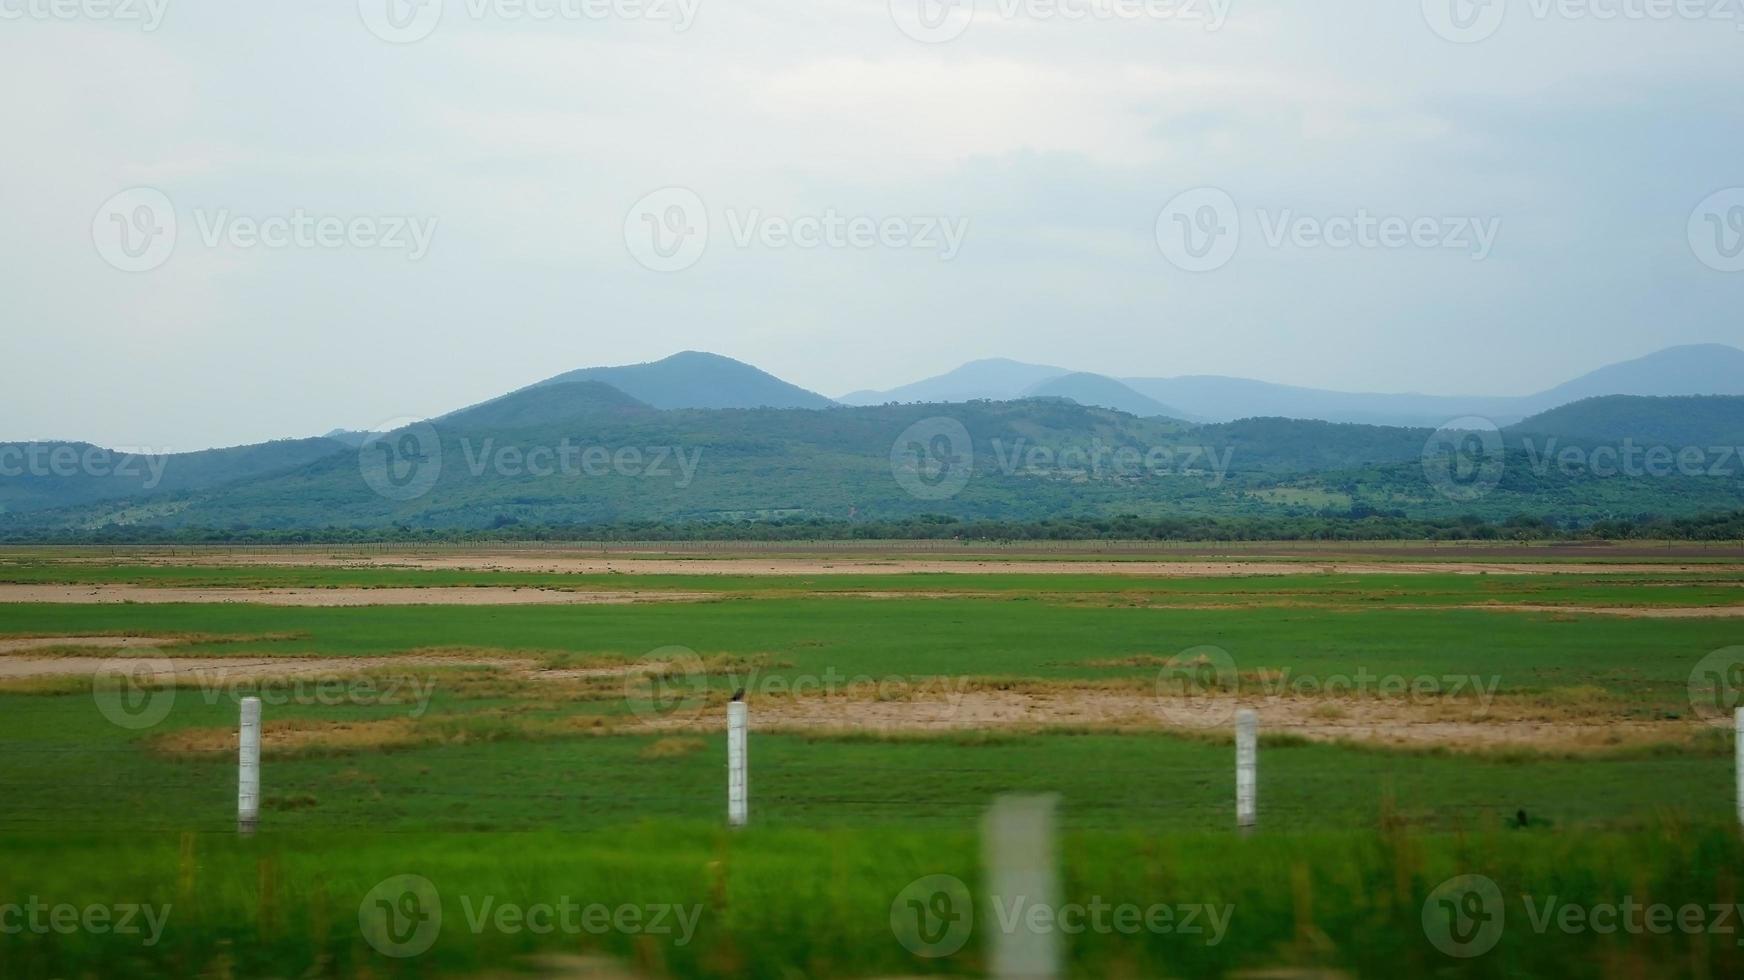 green grass field, with dry areas, a fence of posts with barbed wire limits the land, photo